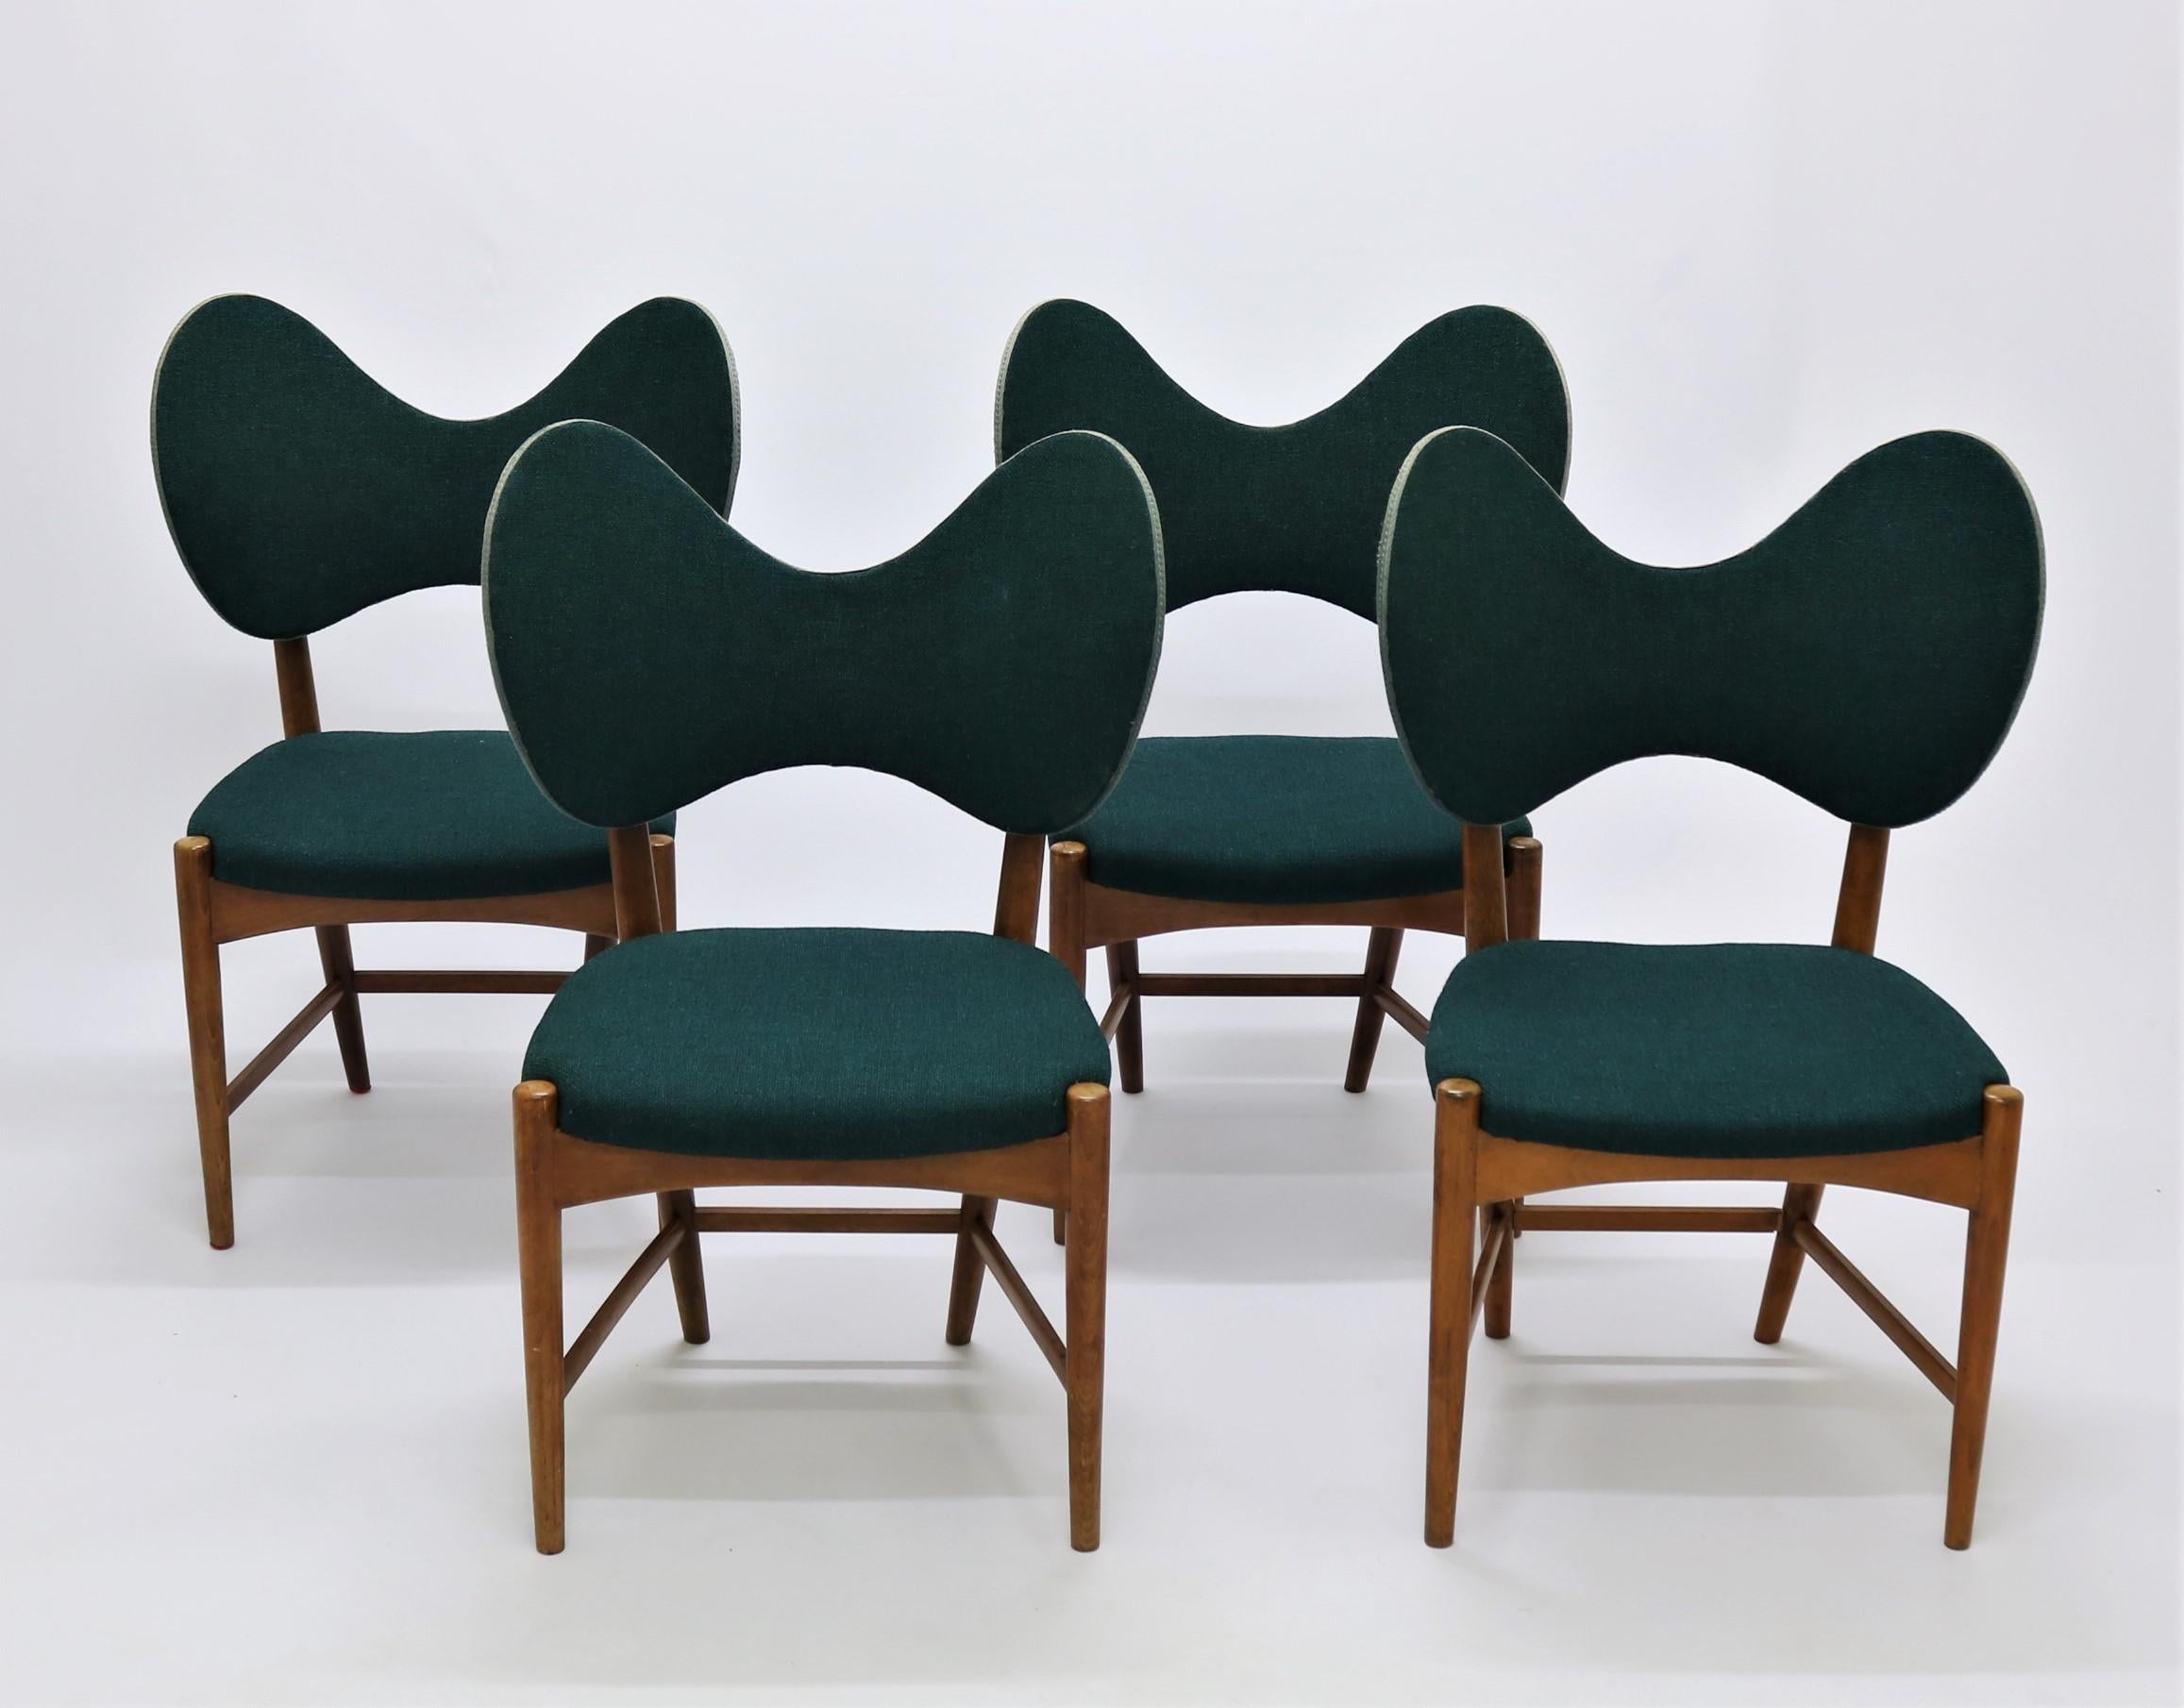 Gorgeous set of very rare Danish design from the early 1950s by designers Eva & Nils Koppel. Made and manufactured in Denmark by Møbelfabrikken Norden. The chairs are made of stained and lacquered beech and the original beautiful blue/turquoise wool